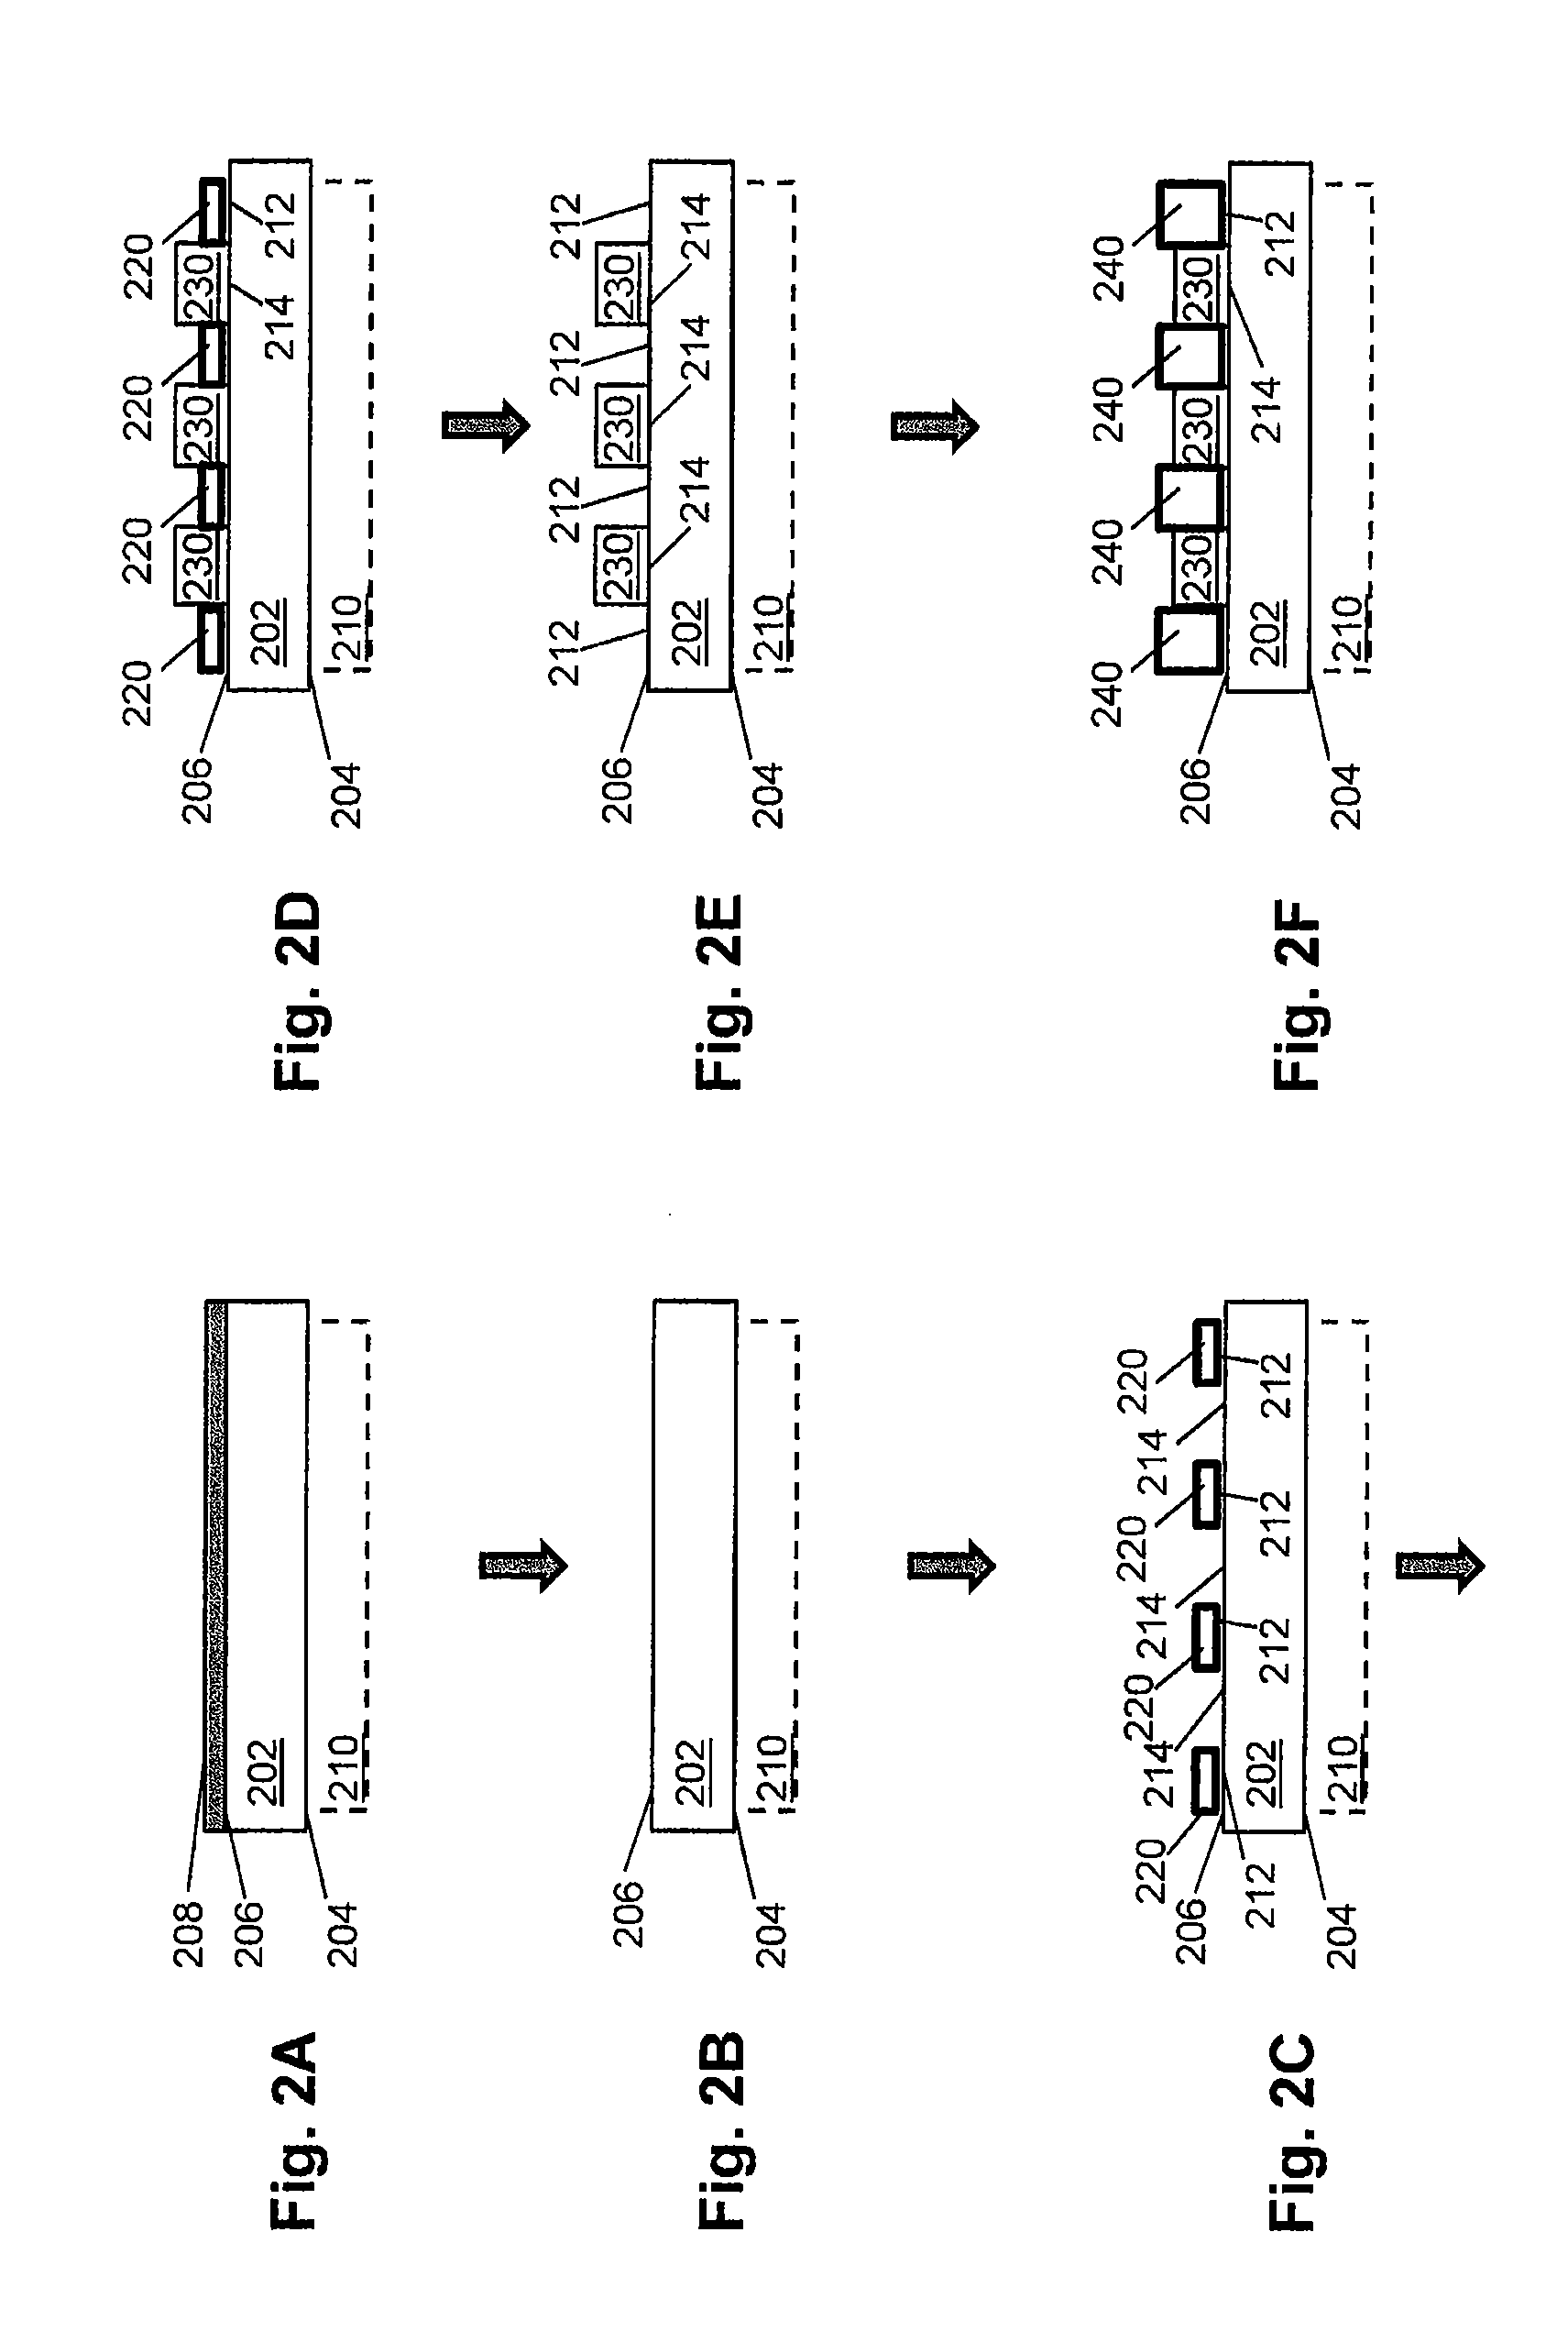 Selective atomic layer deposition of passivation layers for silicon-based photovoltaic devices